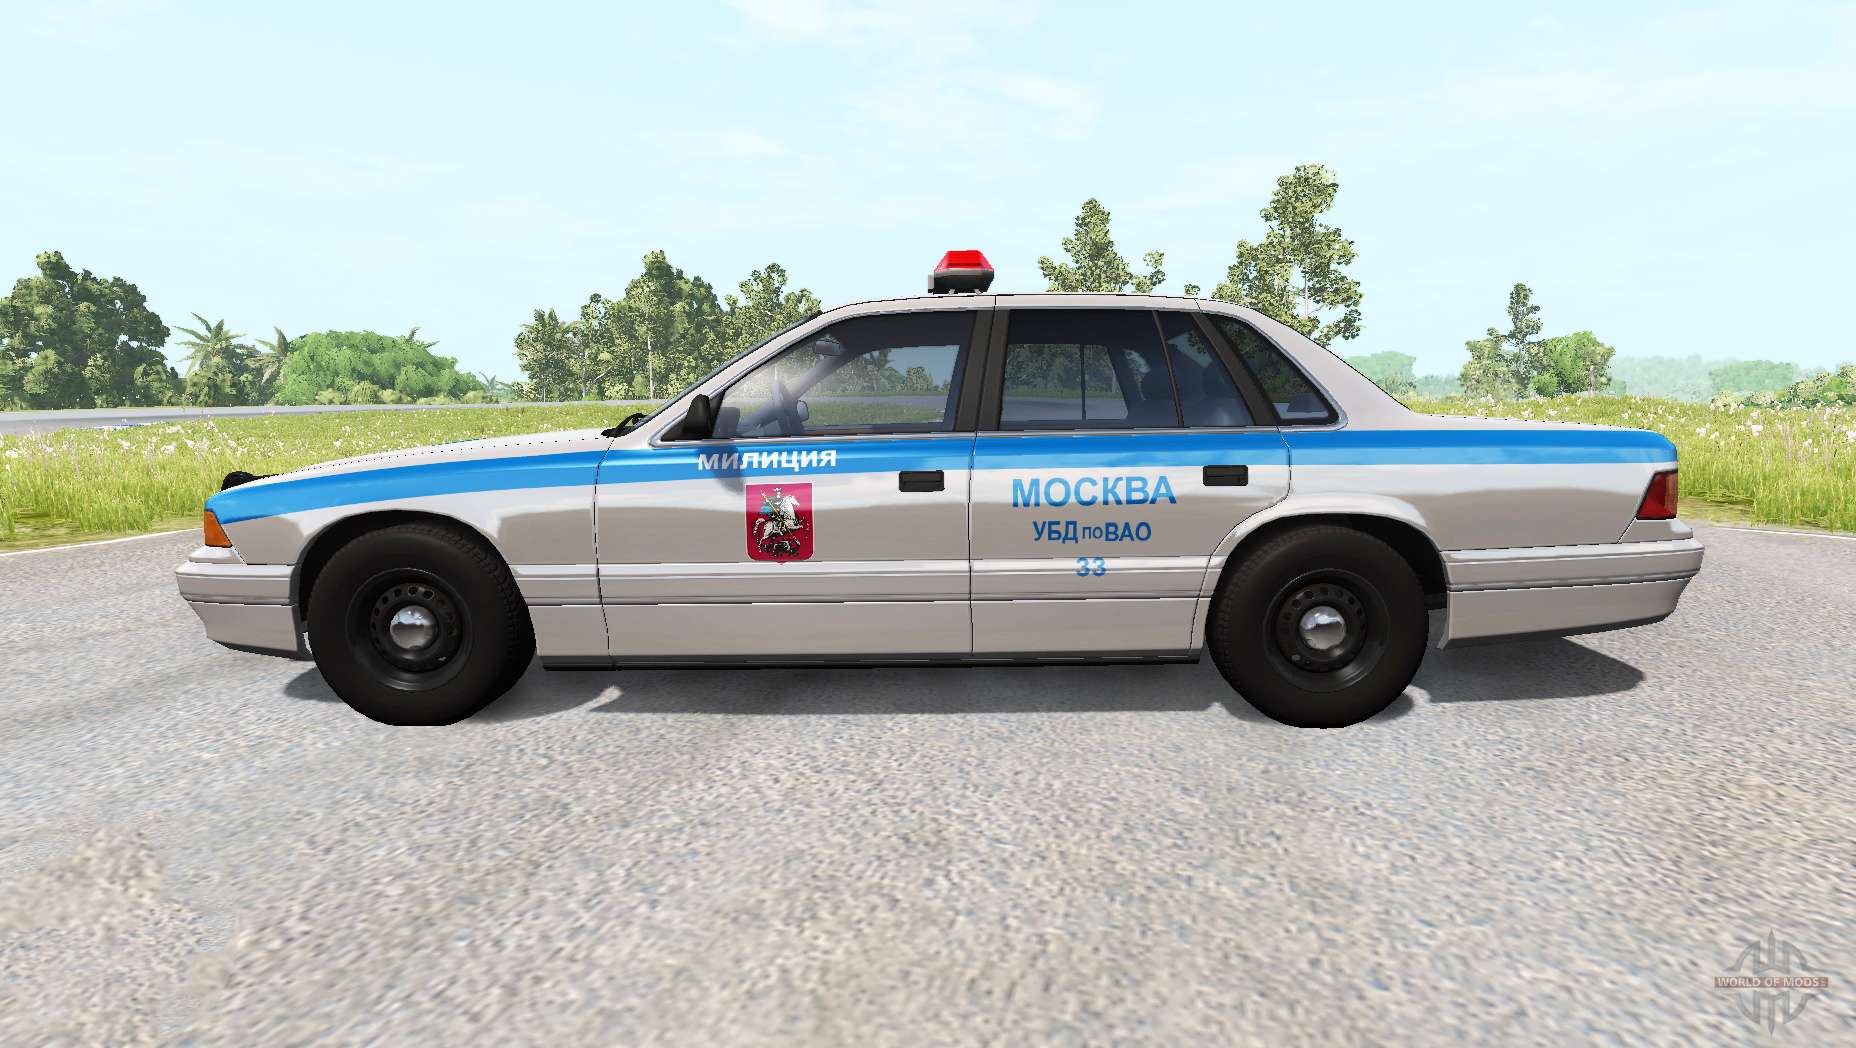 Beamng drive полицейские машины. BEAMNG.Drive полиция. BEAMNG Drive Police. ВАЗ-2115 полиция для BEAMNG Drive. Chevrolet Caprice 1980 BEAMNG.